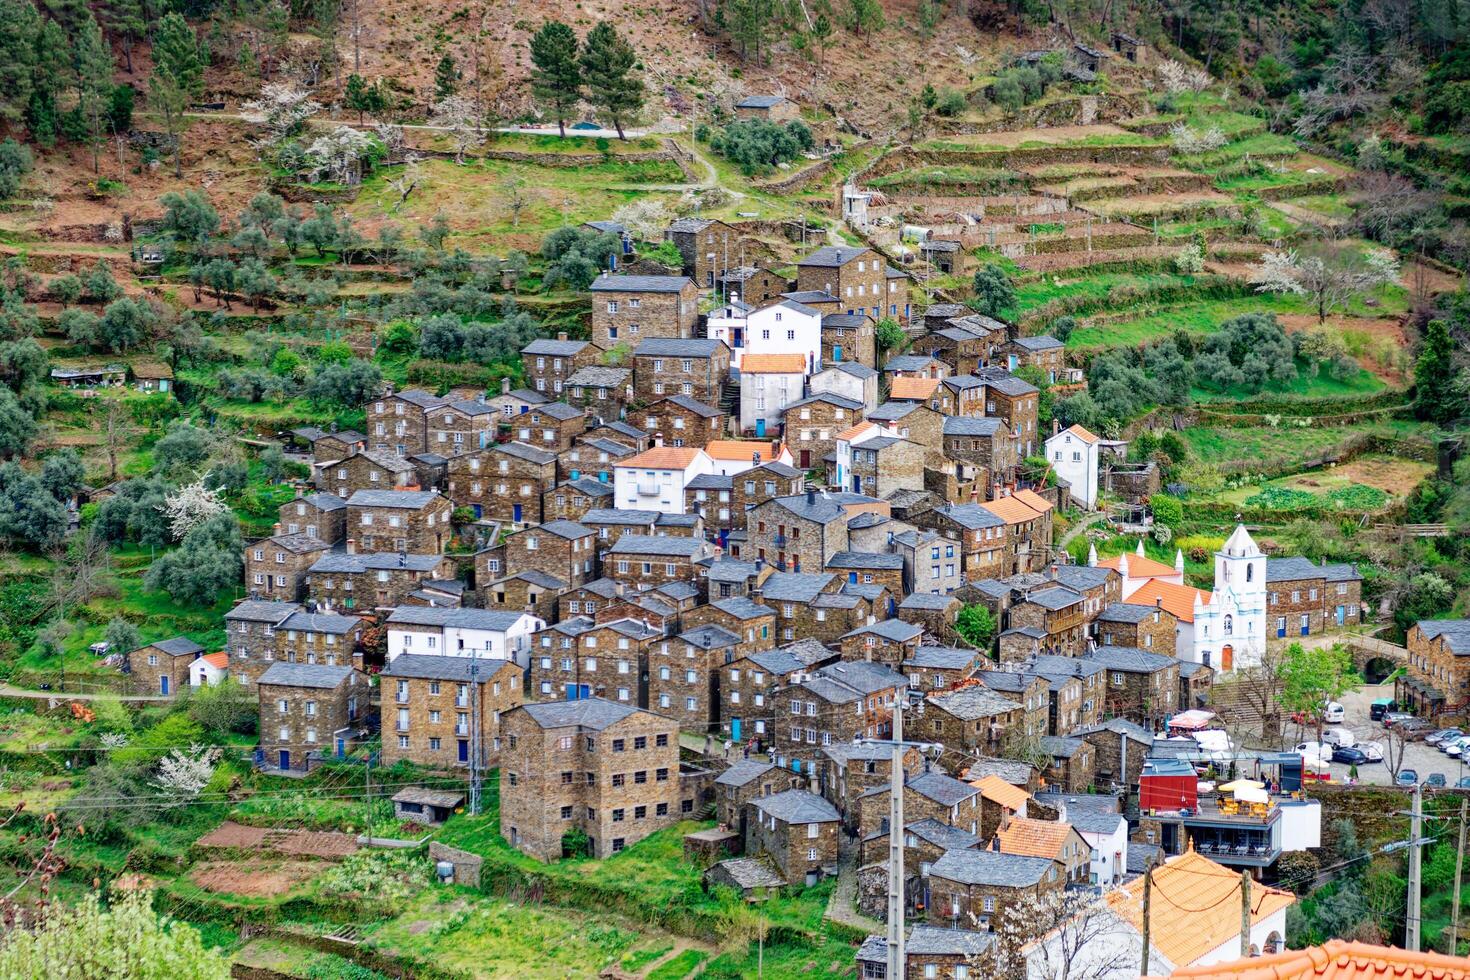 View of the Piodao village in Portugal. Rural tourism. Beautifully built upon the ledges of the mountain, the village of Piodao is harmoniously carved into nature with its schist houses and streets. photo